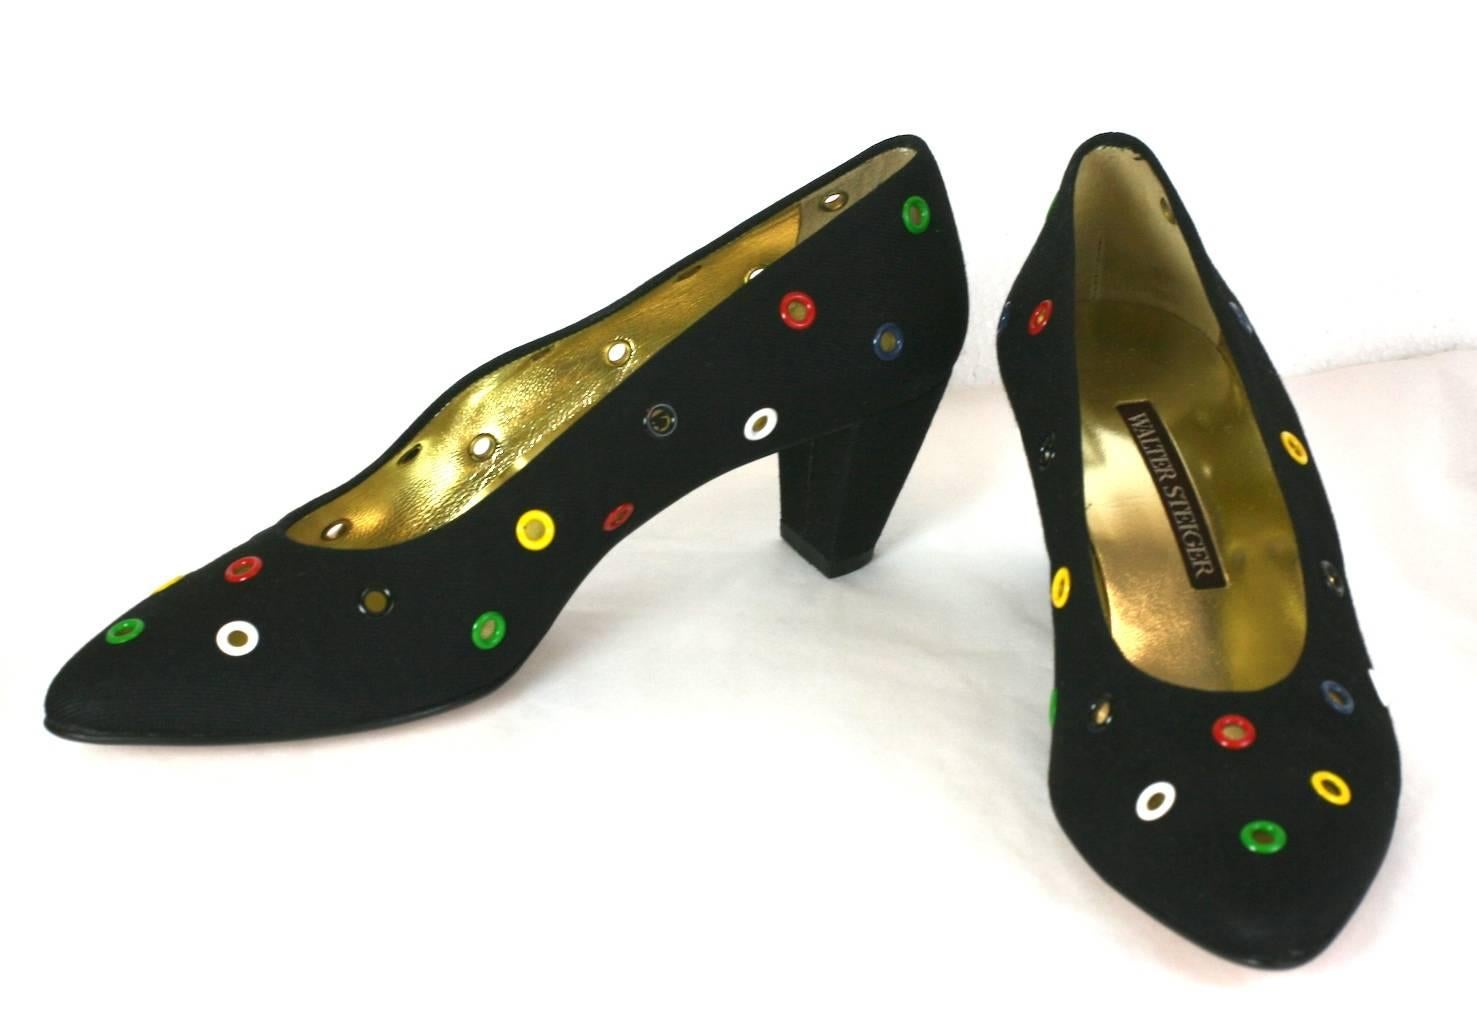 Walter Steiger Black Linen Pumps with Colorful Eyelets, lined in gold kid leather. Steiger's shoes were always powerful, vibrant and edgy at the same time. He had eponymous boutiques and collaborated with many fashion houses as well in Paris for